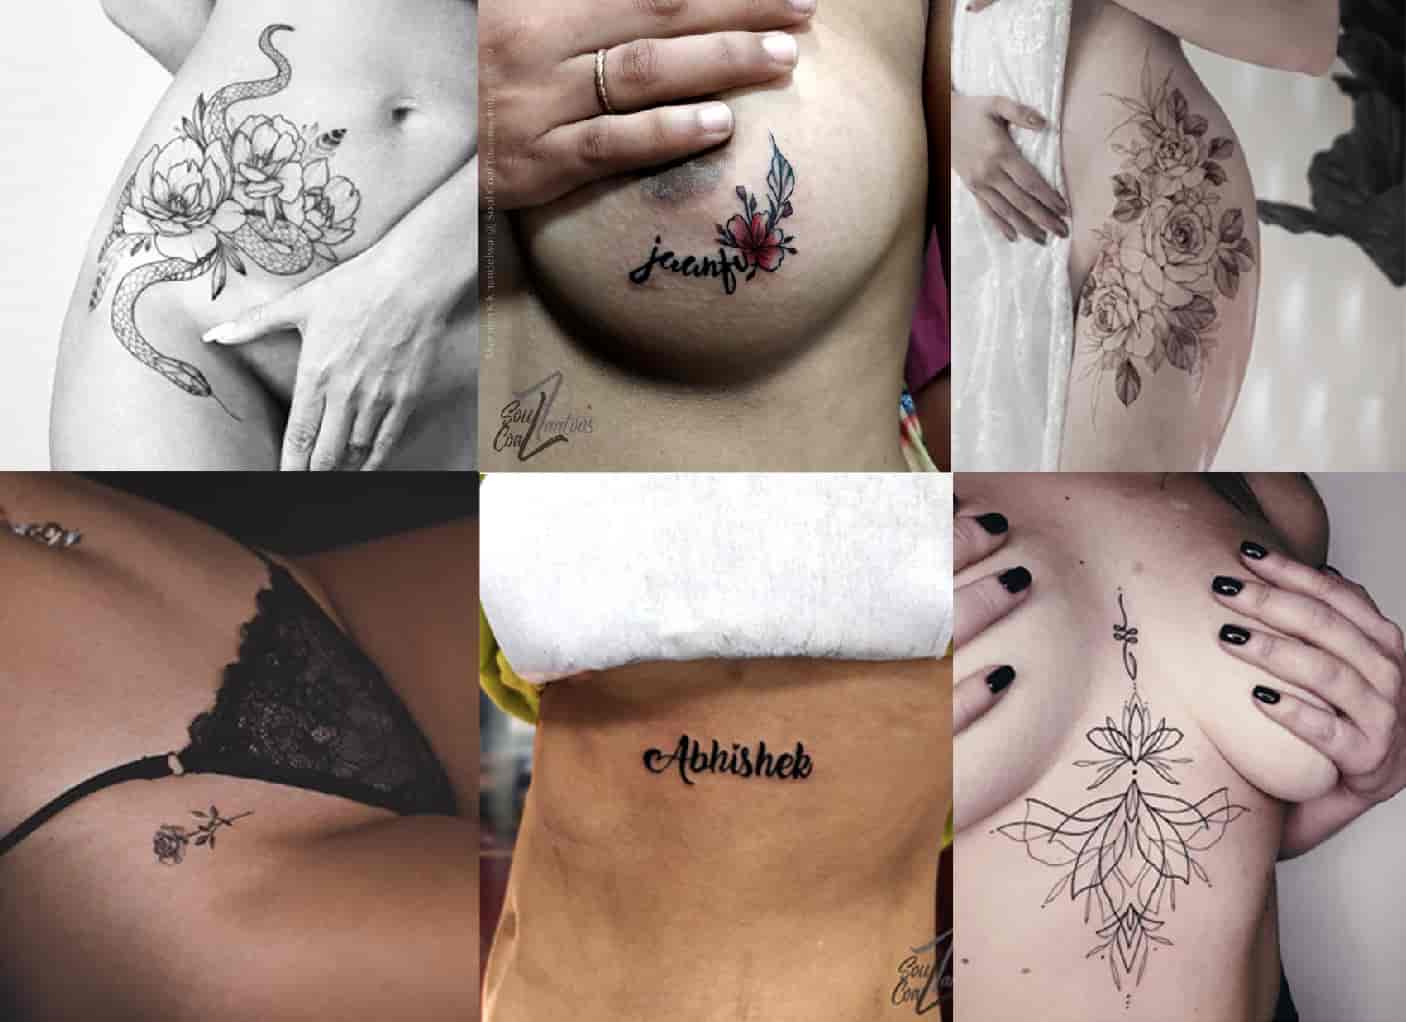 amy odaniel recommends tattoos on private parts pictures for women pic